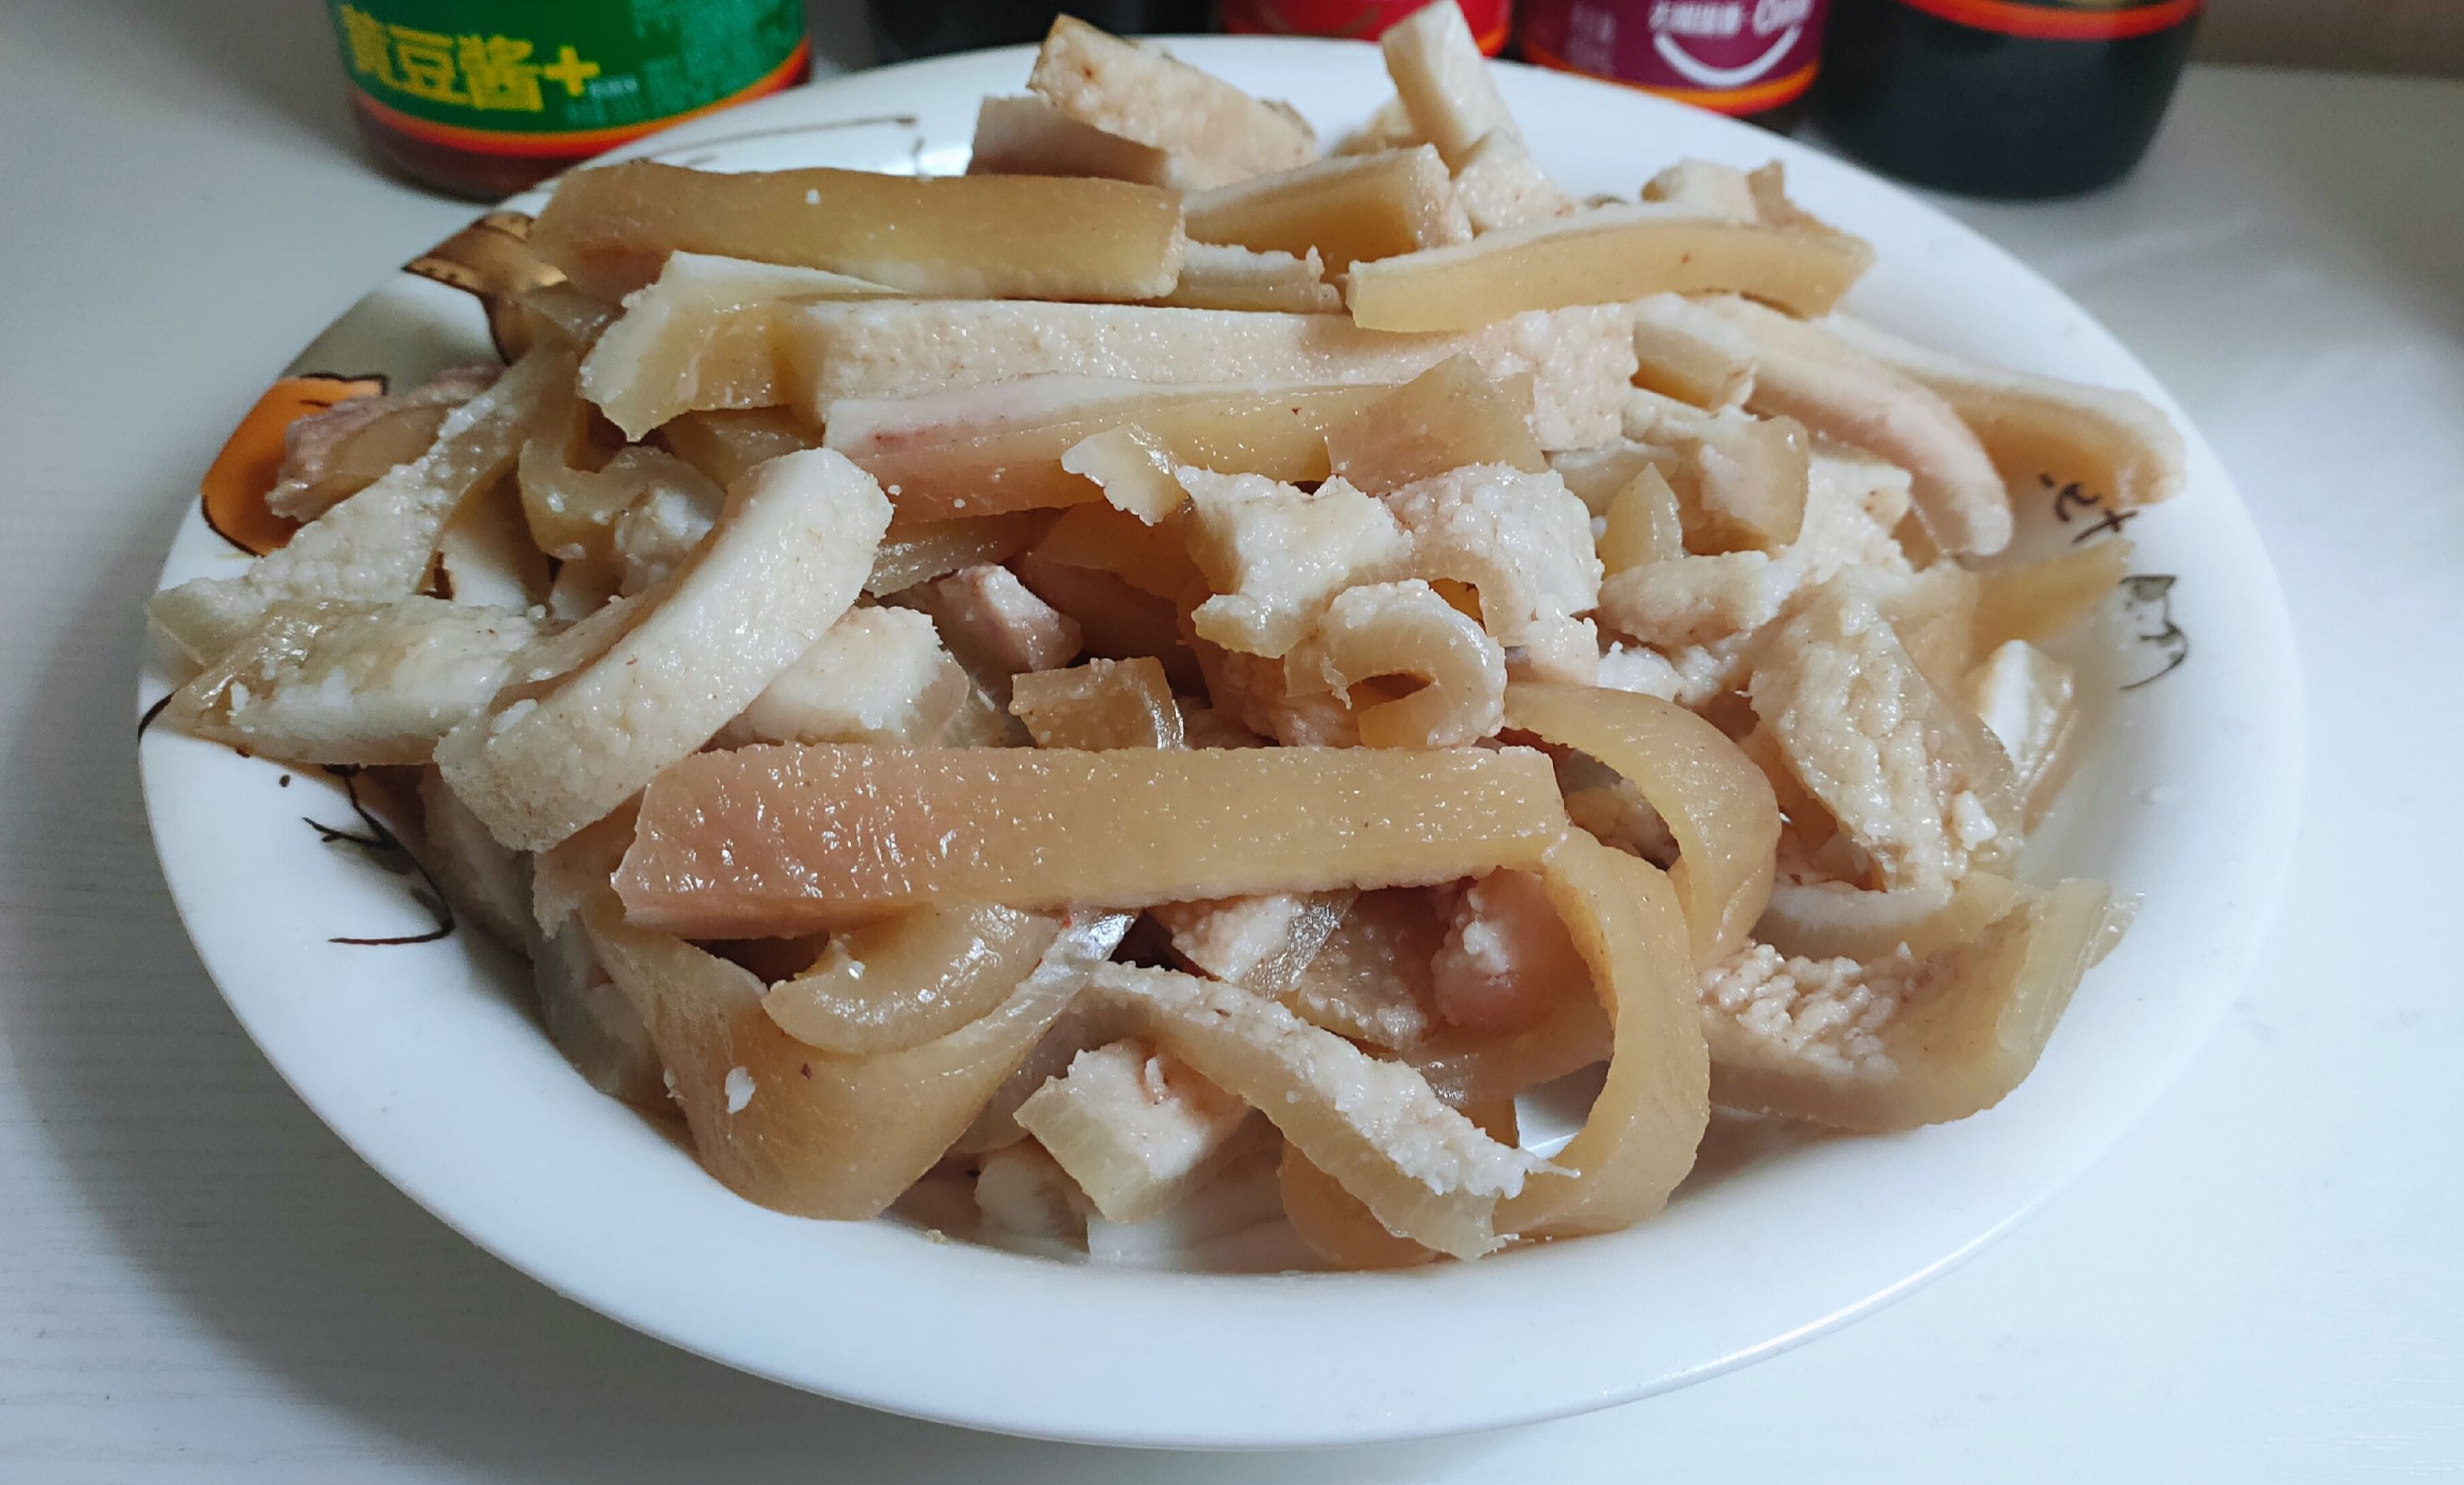 Beauty and Delicious Pig Skin Jelly recipe